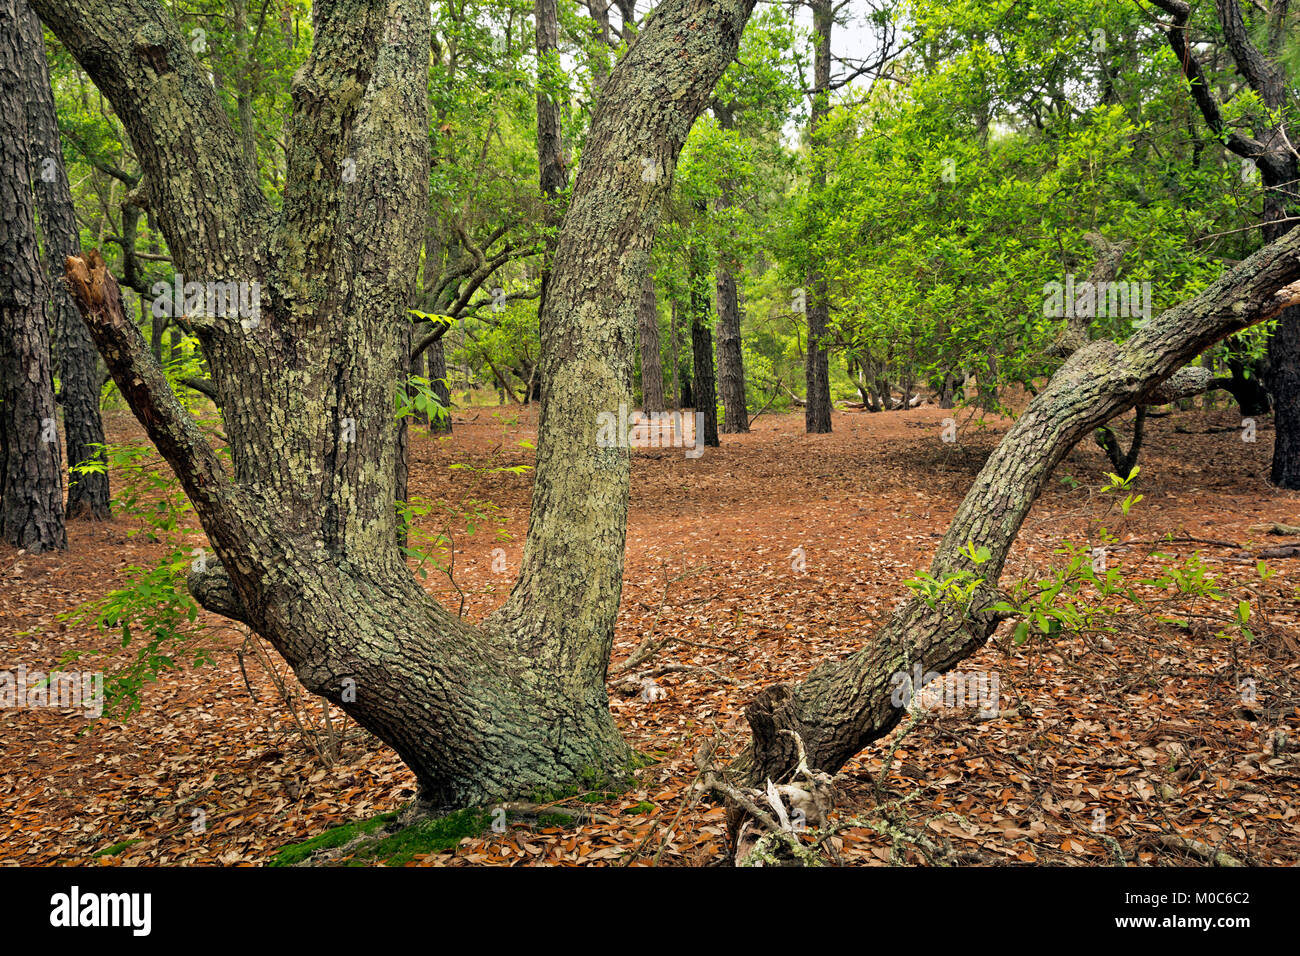 NC01378-00...NORTH CAROLINA - Live oak trees along the trail through an oak and loblolly pine forest at the Currituck Banks Reserve on the Outer Banks Stock Photo